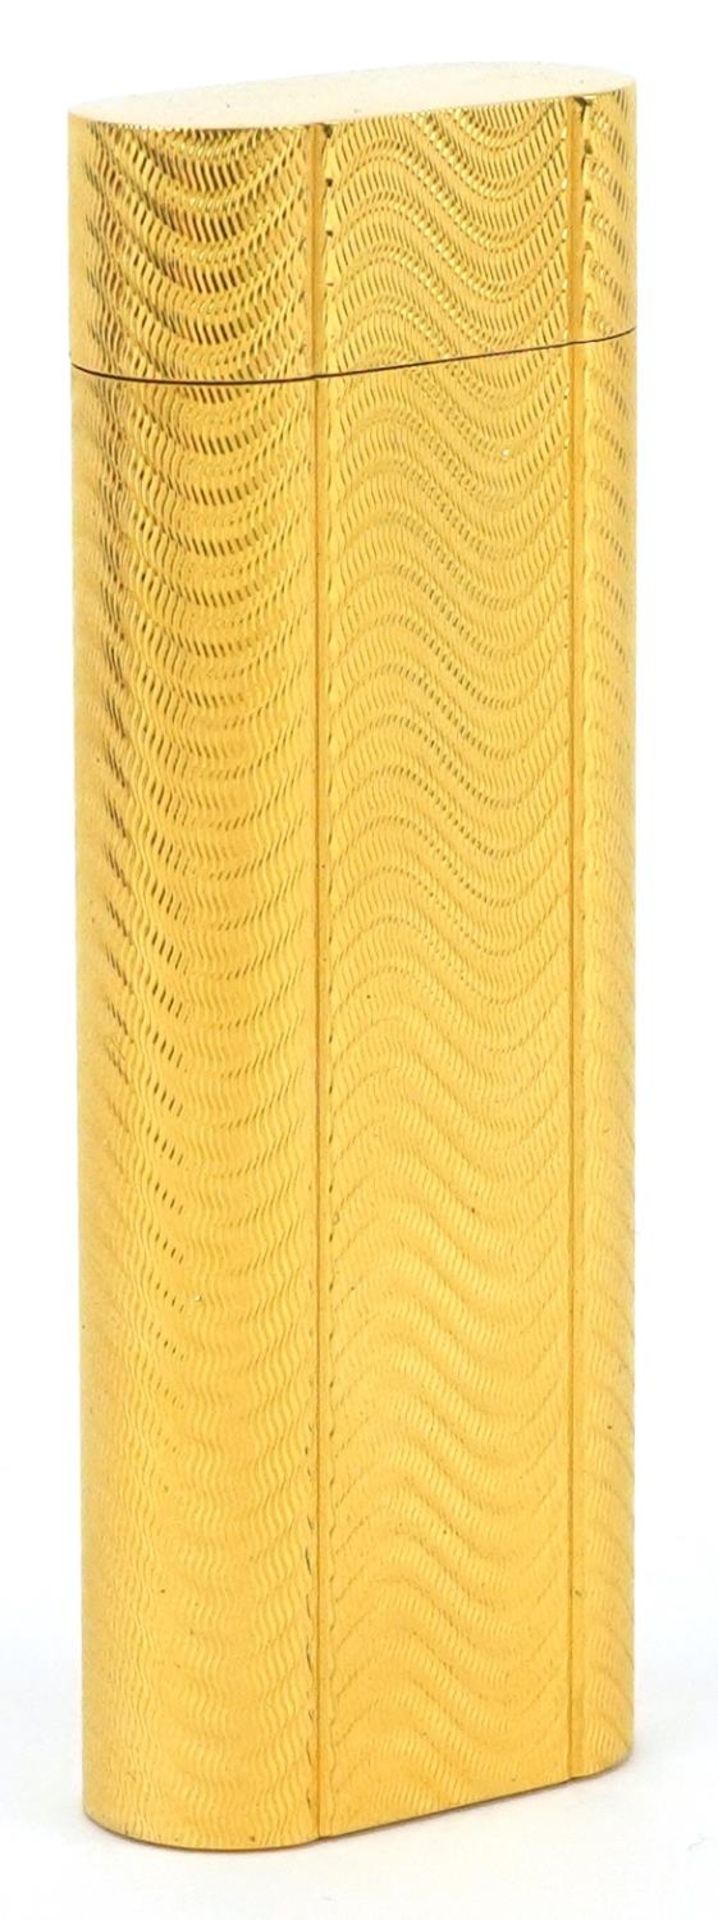 Cartier, gold plated French engine turned pocket lighter with box numbered D24339, 7cm high - Image 2 of 4